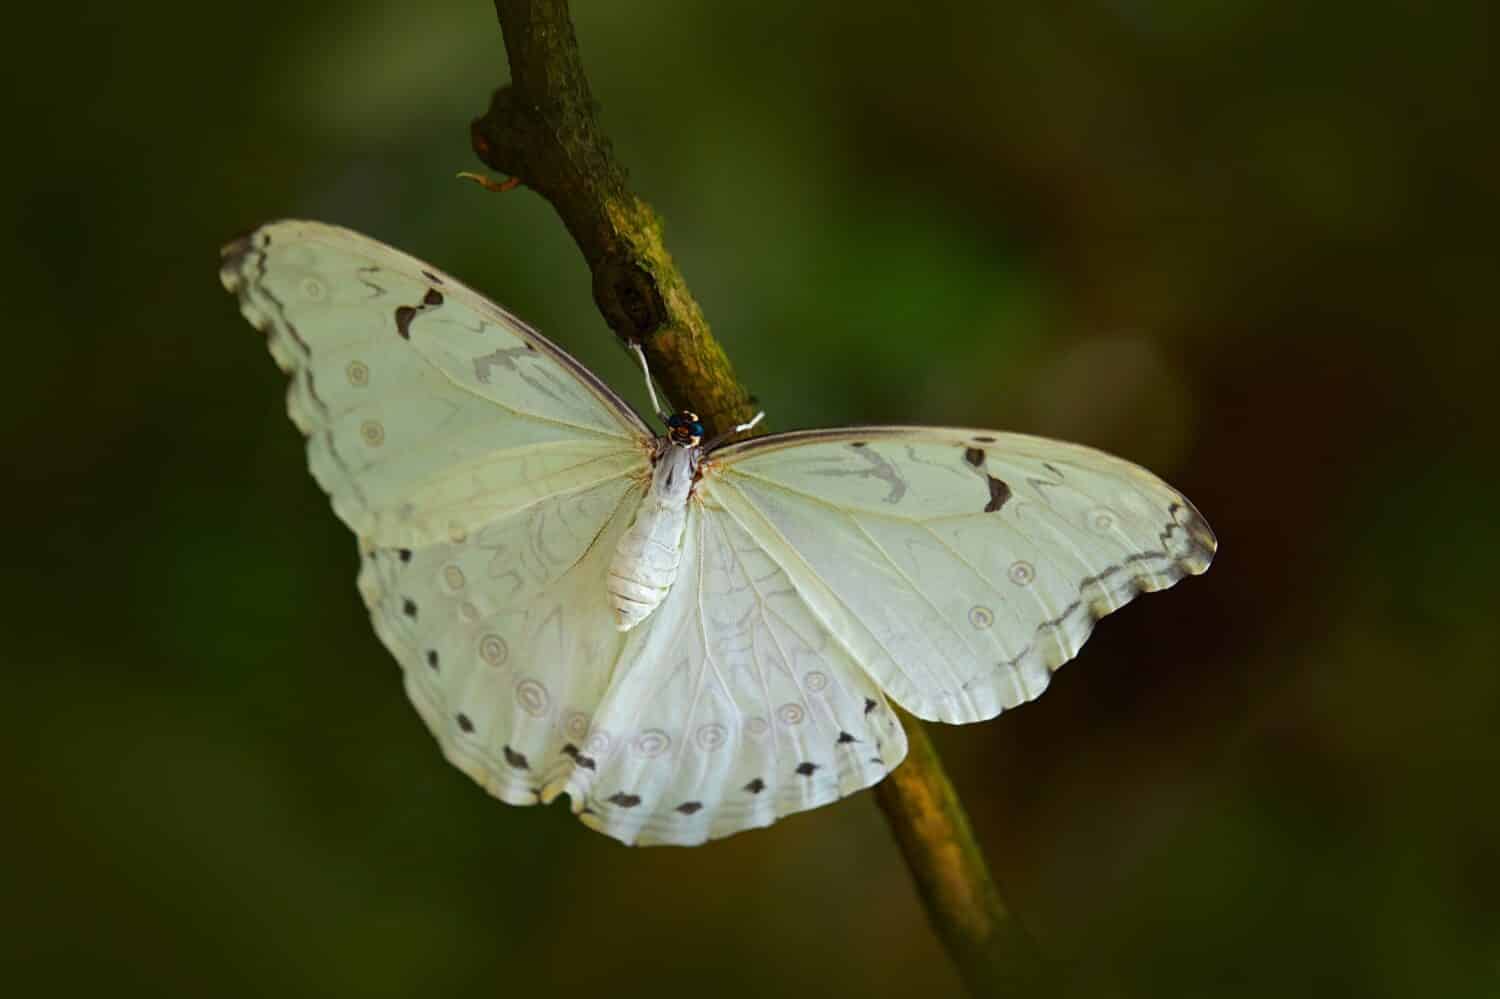 White butterfly on green leaves in tropic jungle. Morpho polyphemus, the white morpho, white butterfly of Mexico and Central America. Exotic insect in the nature tropical habitat.